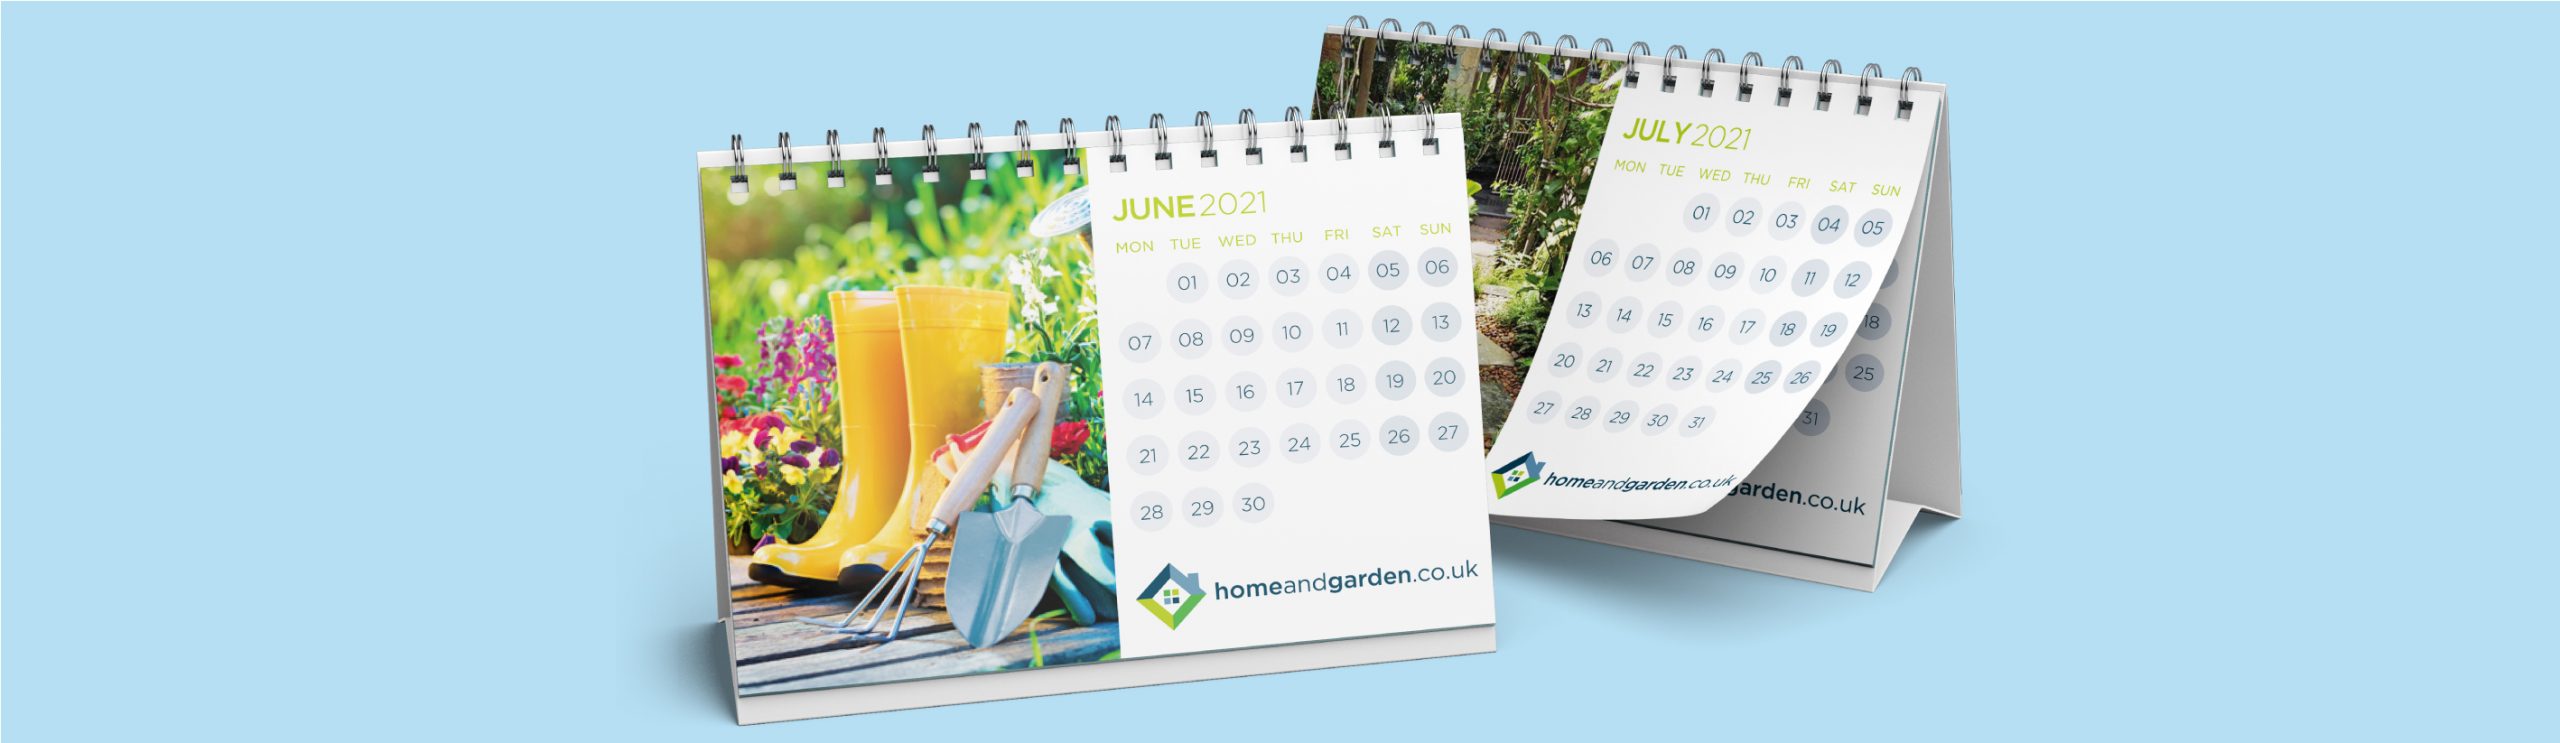 Ace Print Personalised Calendar Printing With Photos